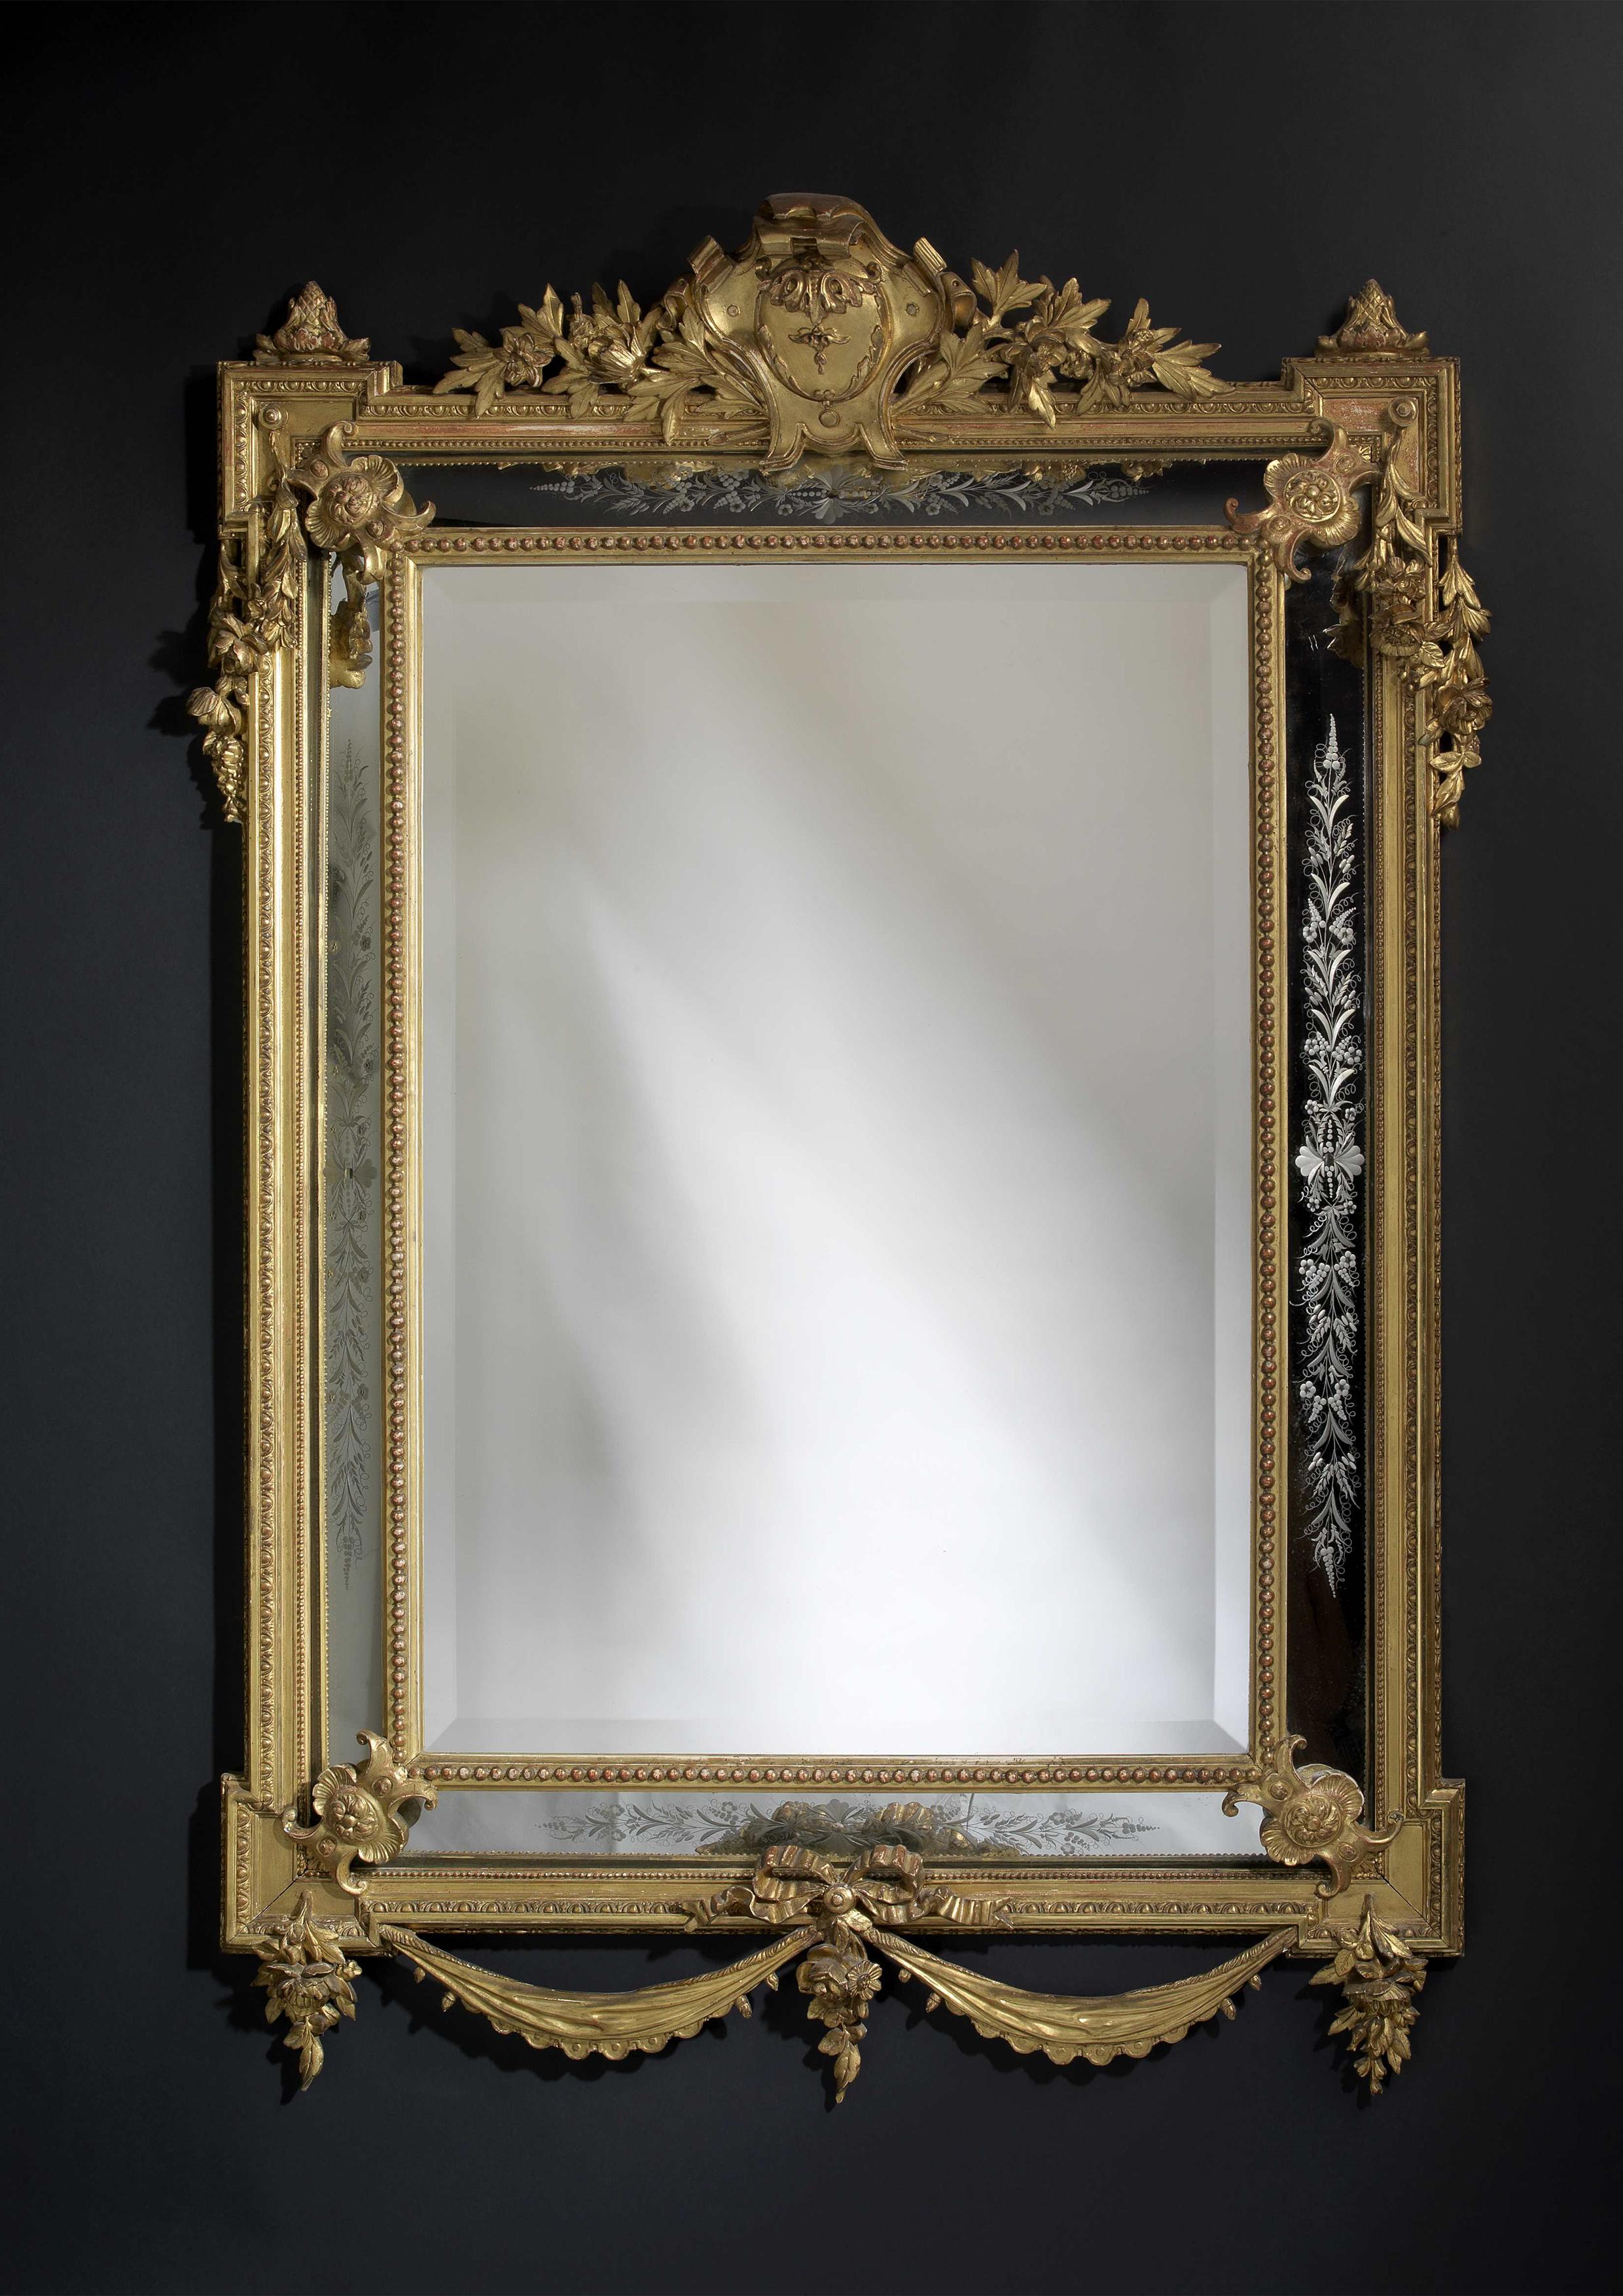 A fine giltwood cushion mirror with etched side plates. 

French, circa 1880. 

The rectangular mirror plate is framed by marginal etched side plates within a beaded and egg and dart carved rectangular giltwood frame with out-set corners and